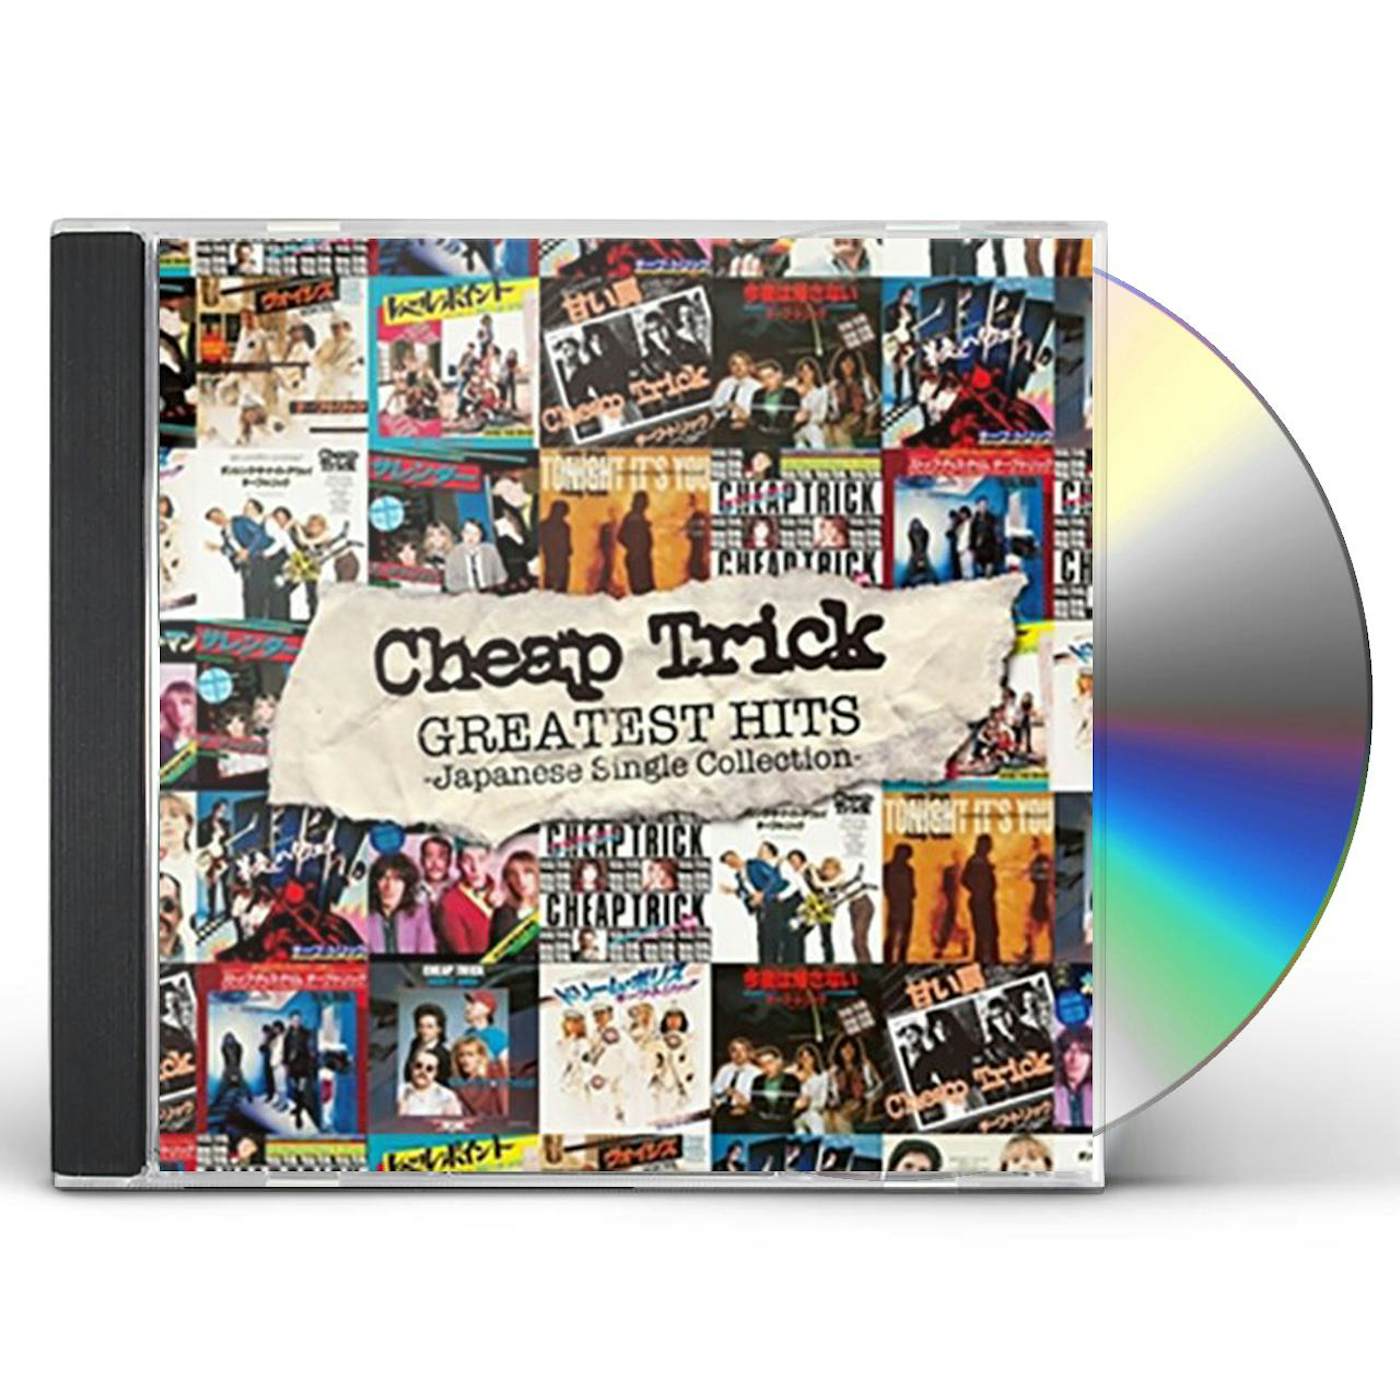 Cheap Trick JAPANESE SINGLES COLLECTION: GREATEST HITS CD